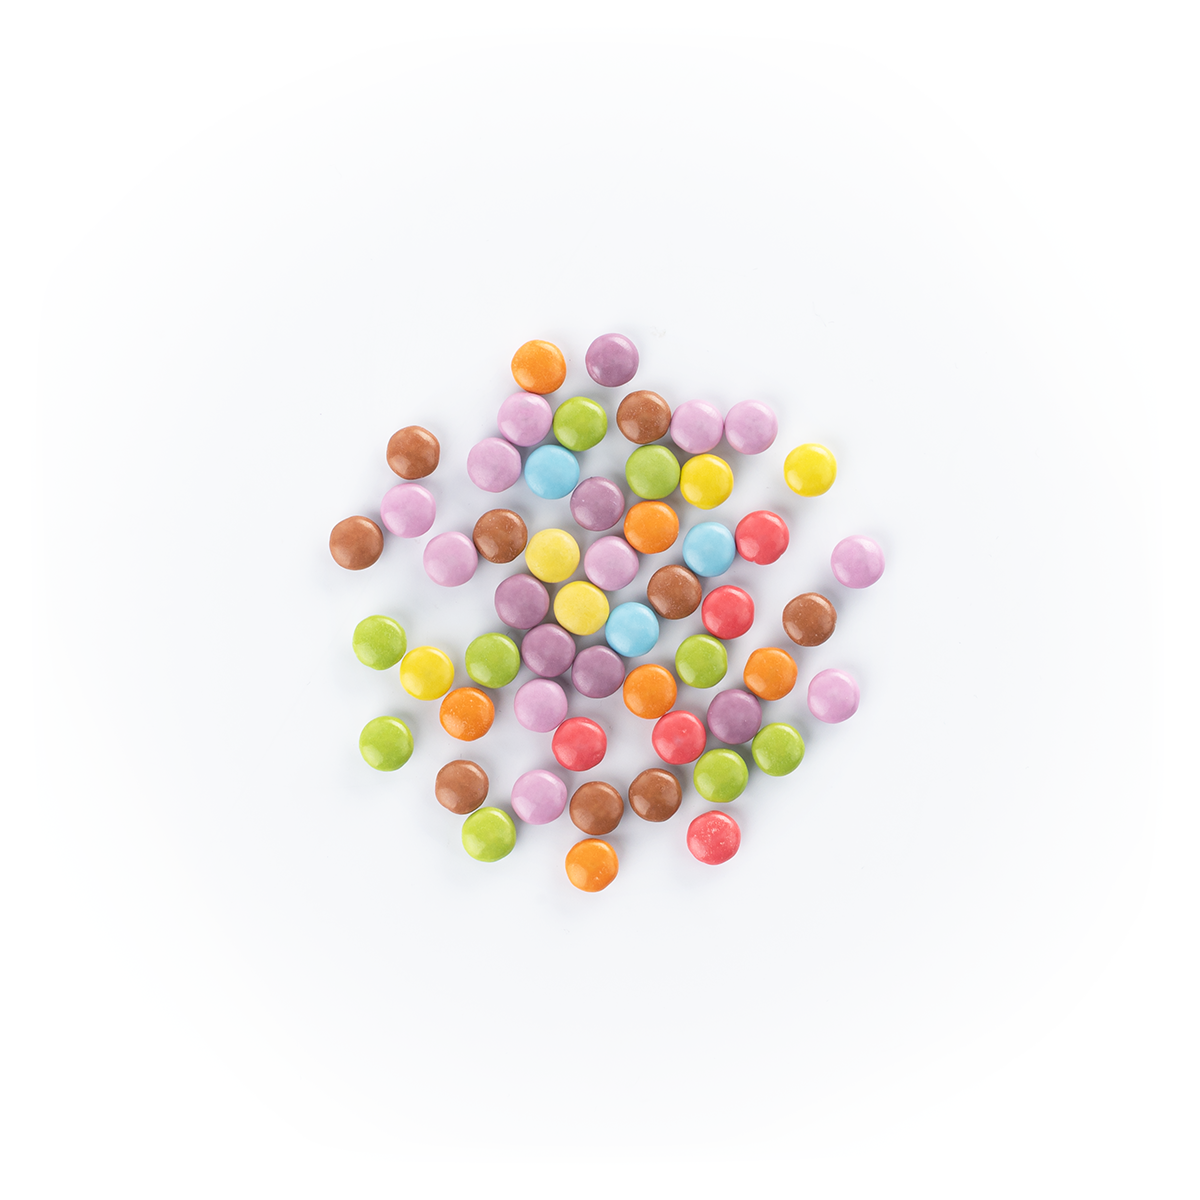 Reduced sugar coated milk chocolate candy beans. High fibre.